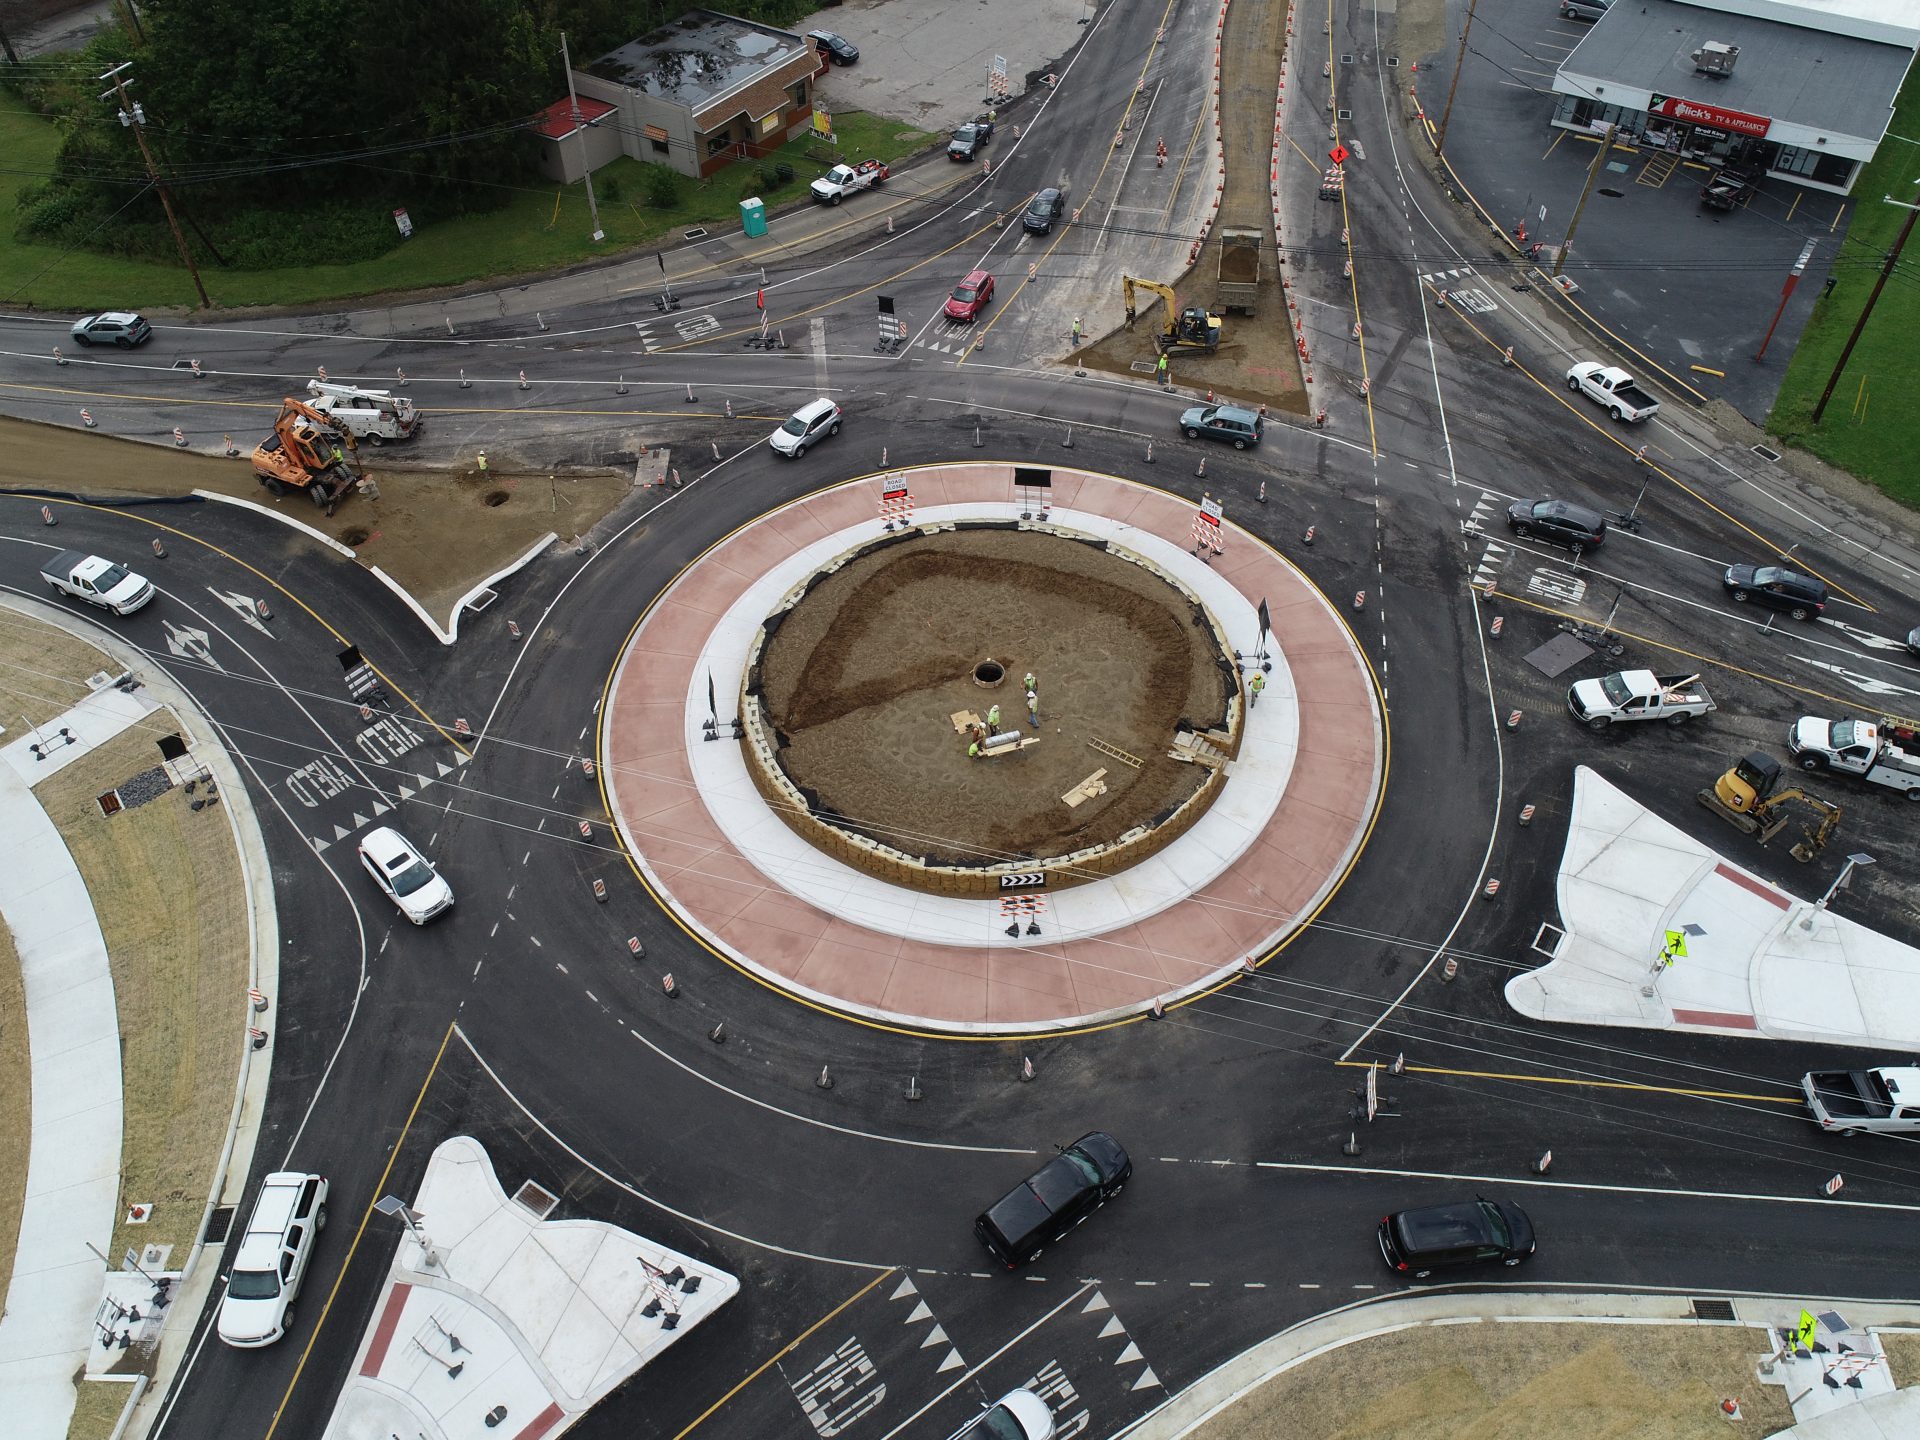 The intersection of Routes 6/322, 19, and 98 (Big I) in Vernon Township, Crawford County is now operating as a single-lane roundabout as construction continues on the multi-lane roundabout being built there.